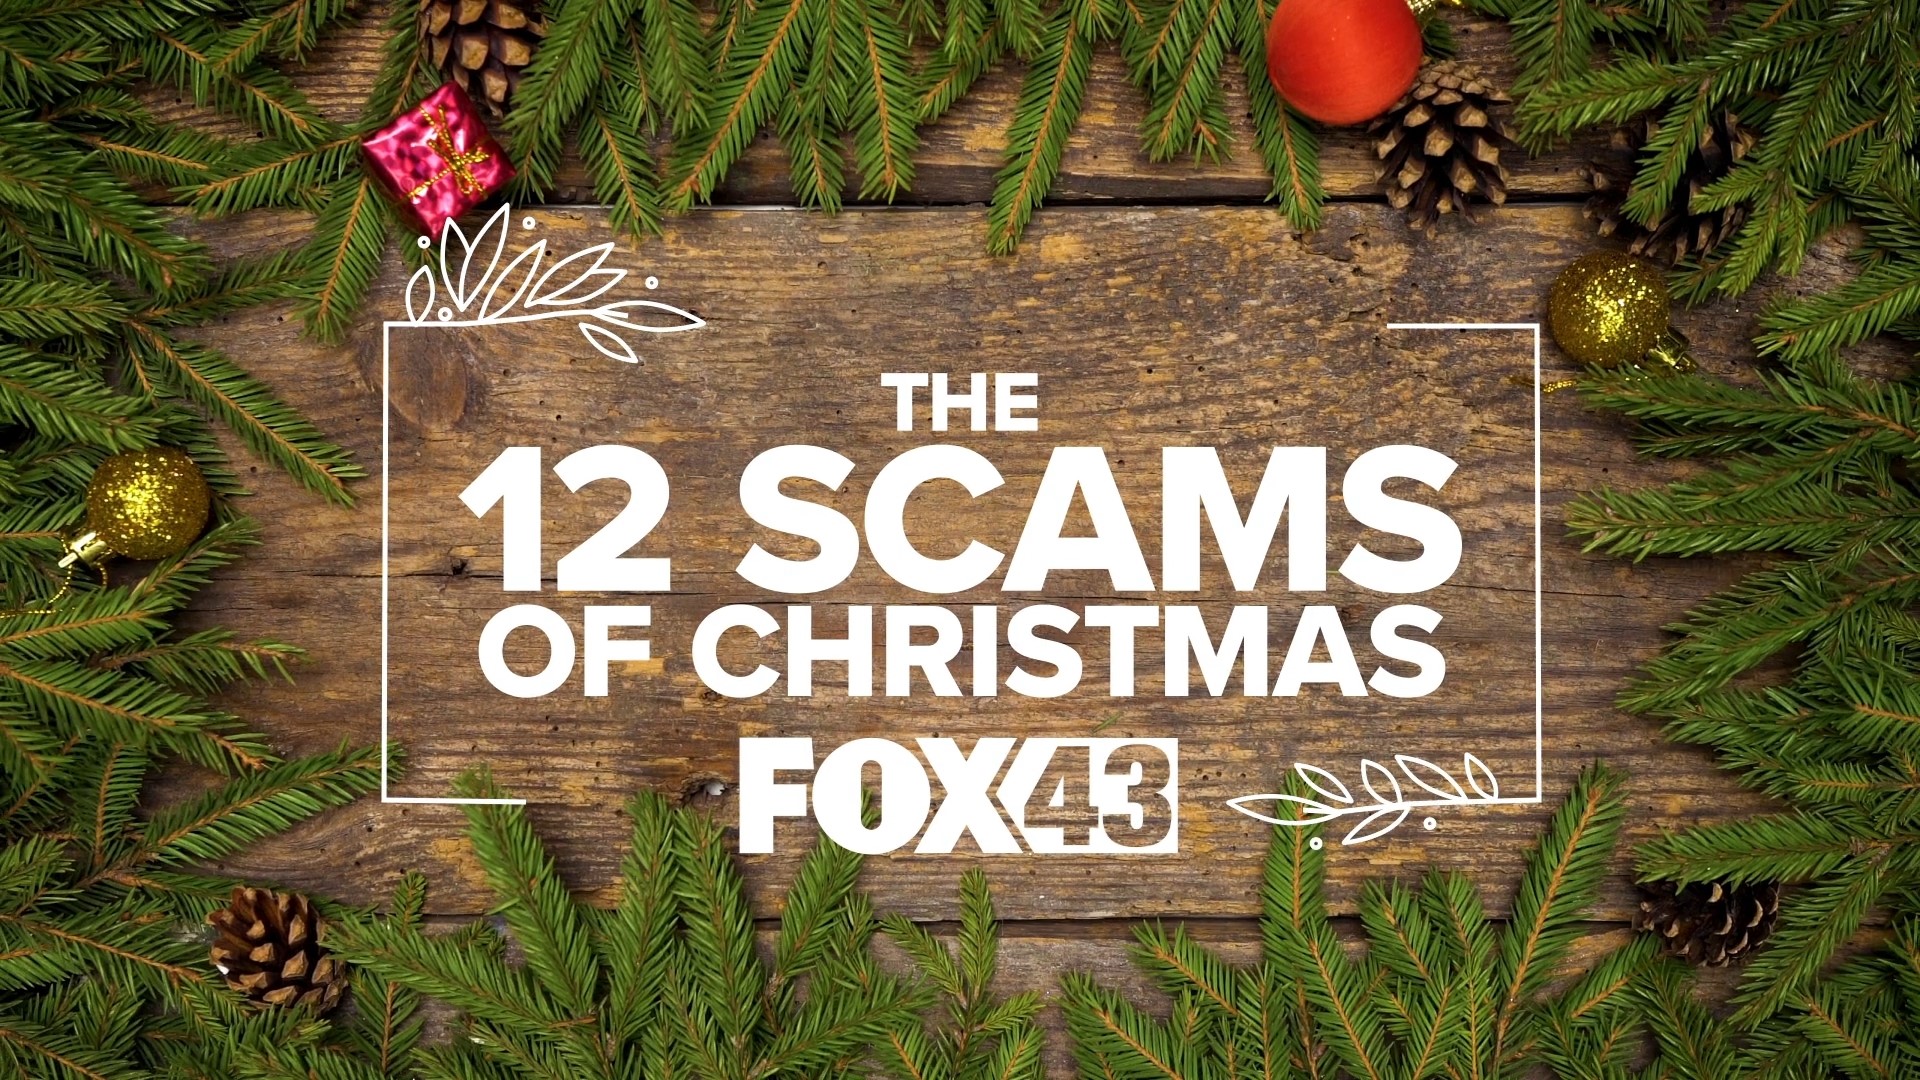 Fake charities made FOX43 Finds Out's 12 scams of Christmas.